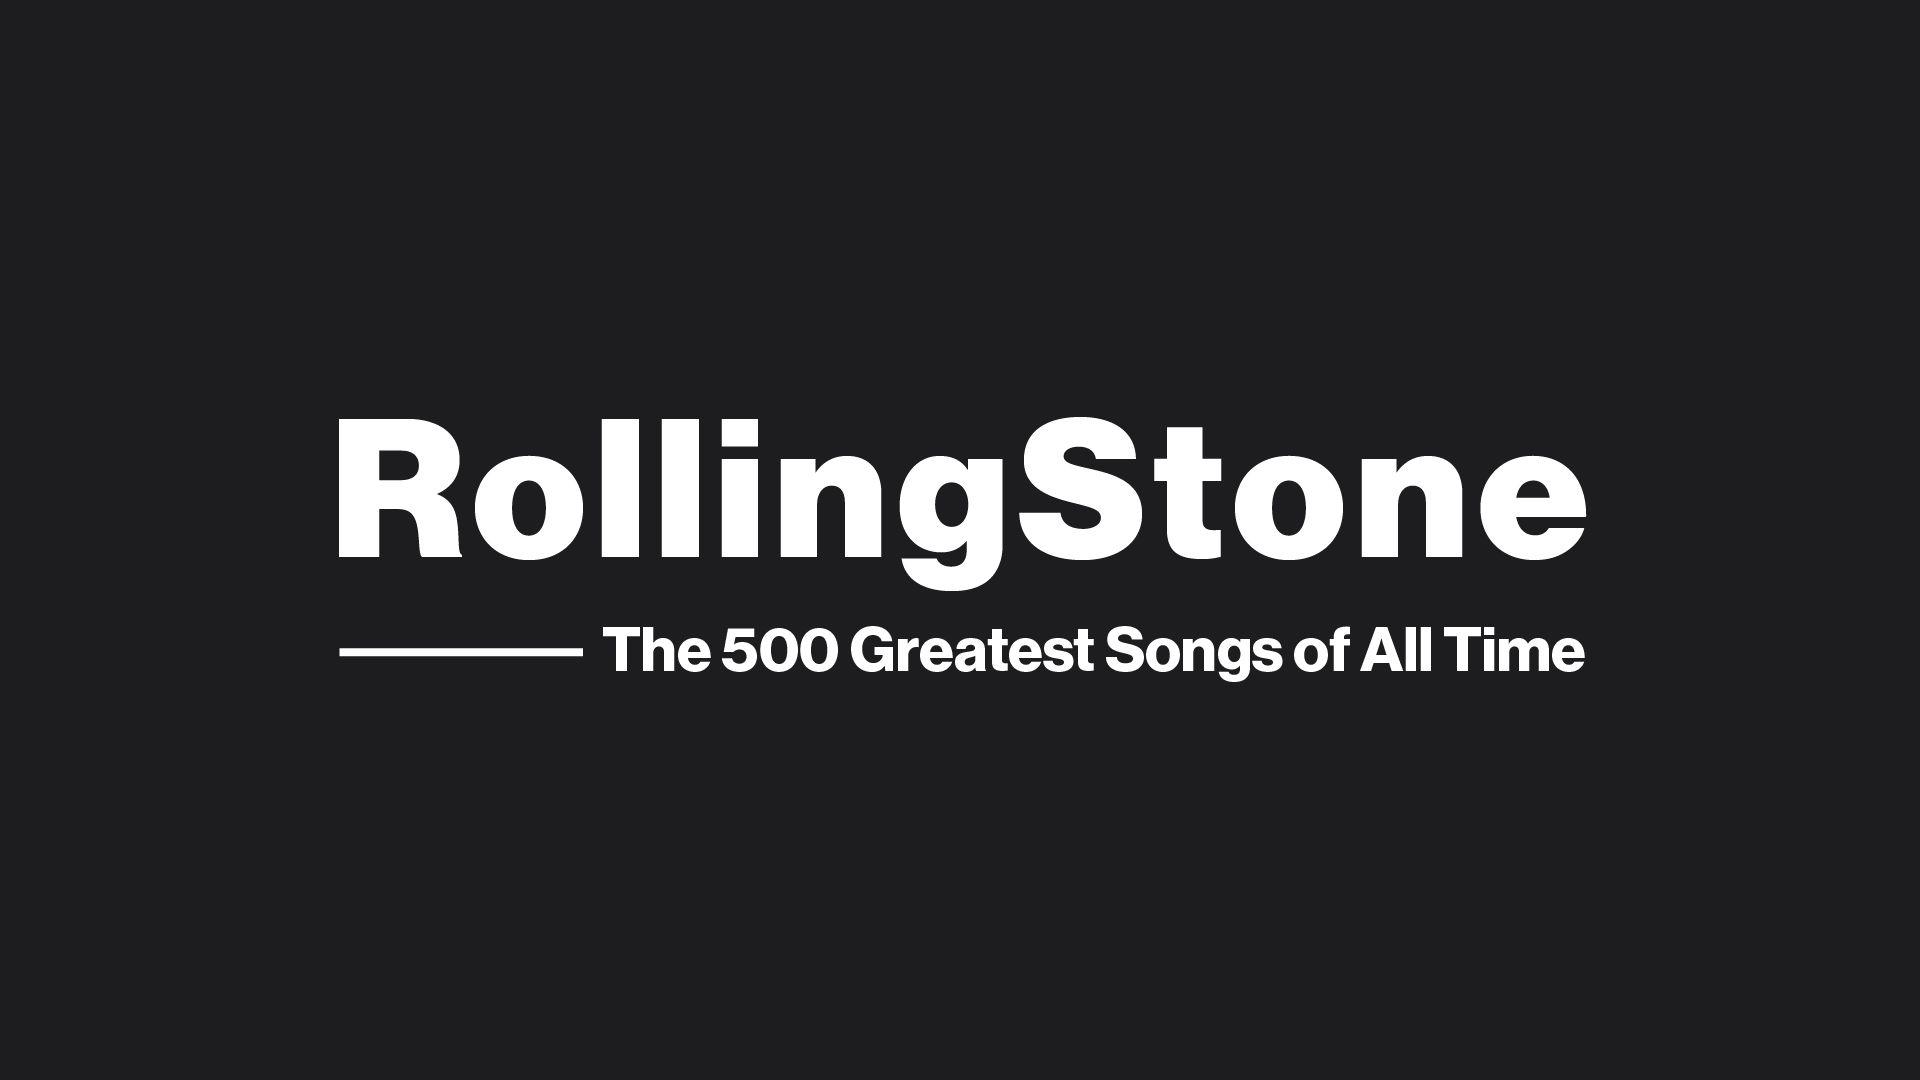 Rolling Stone - The 500 Greatest Songs of All Time